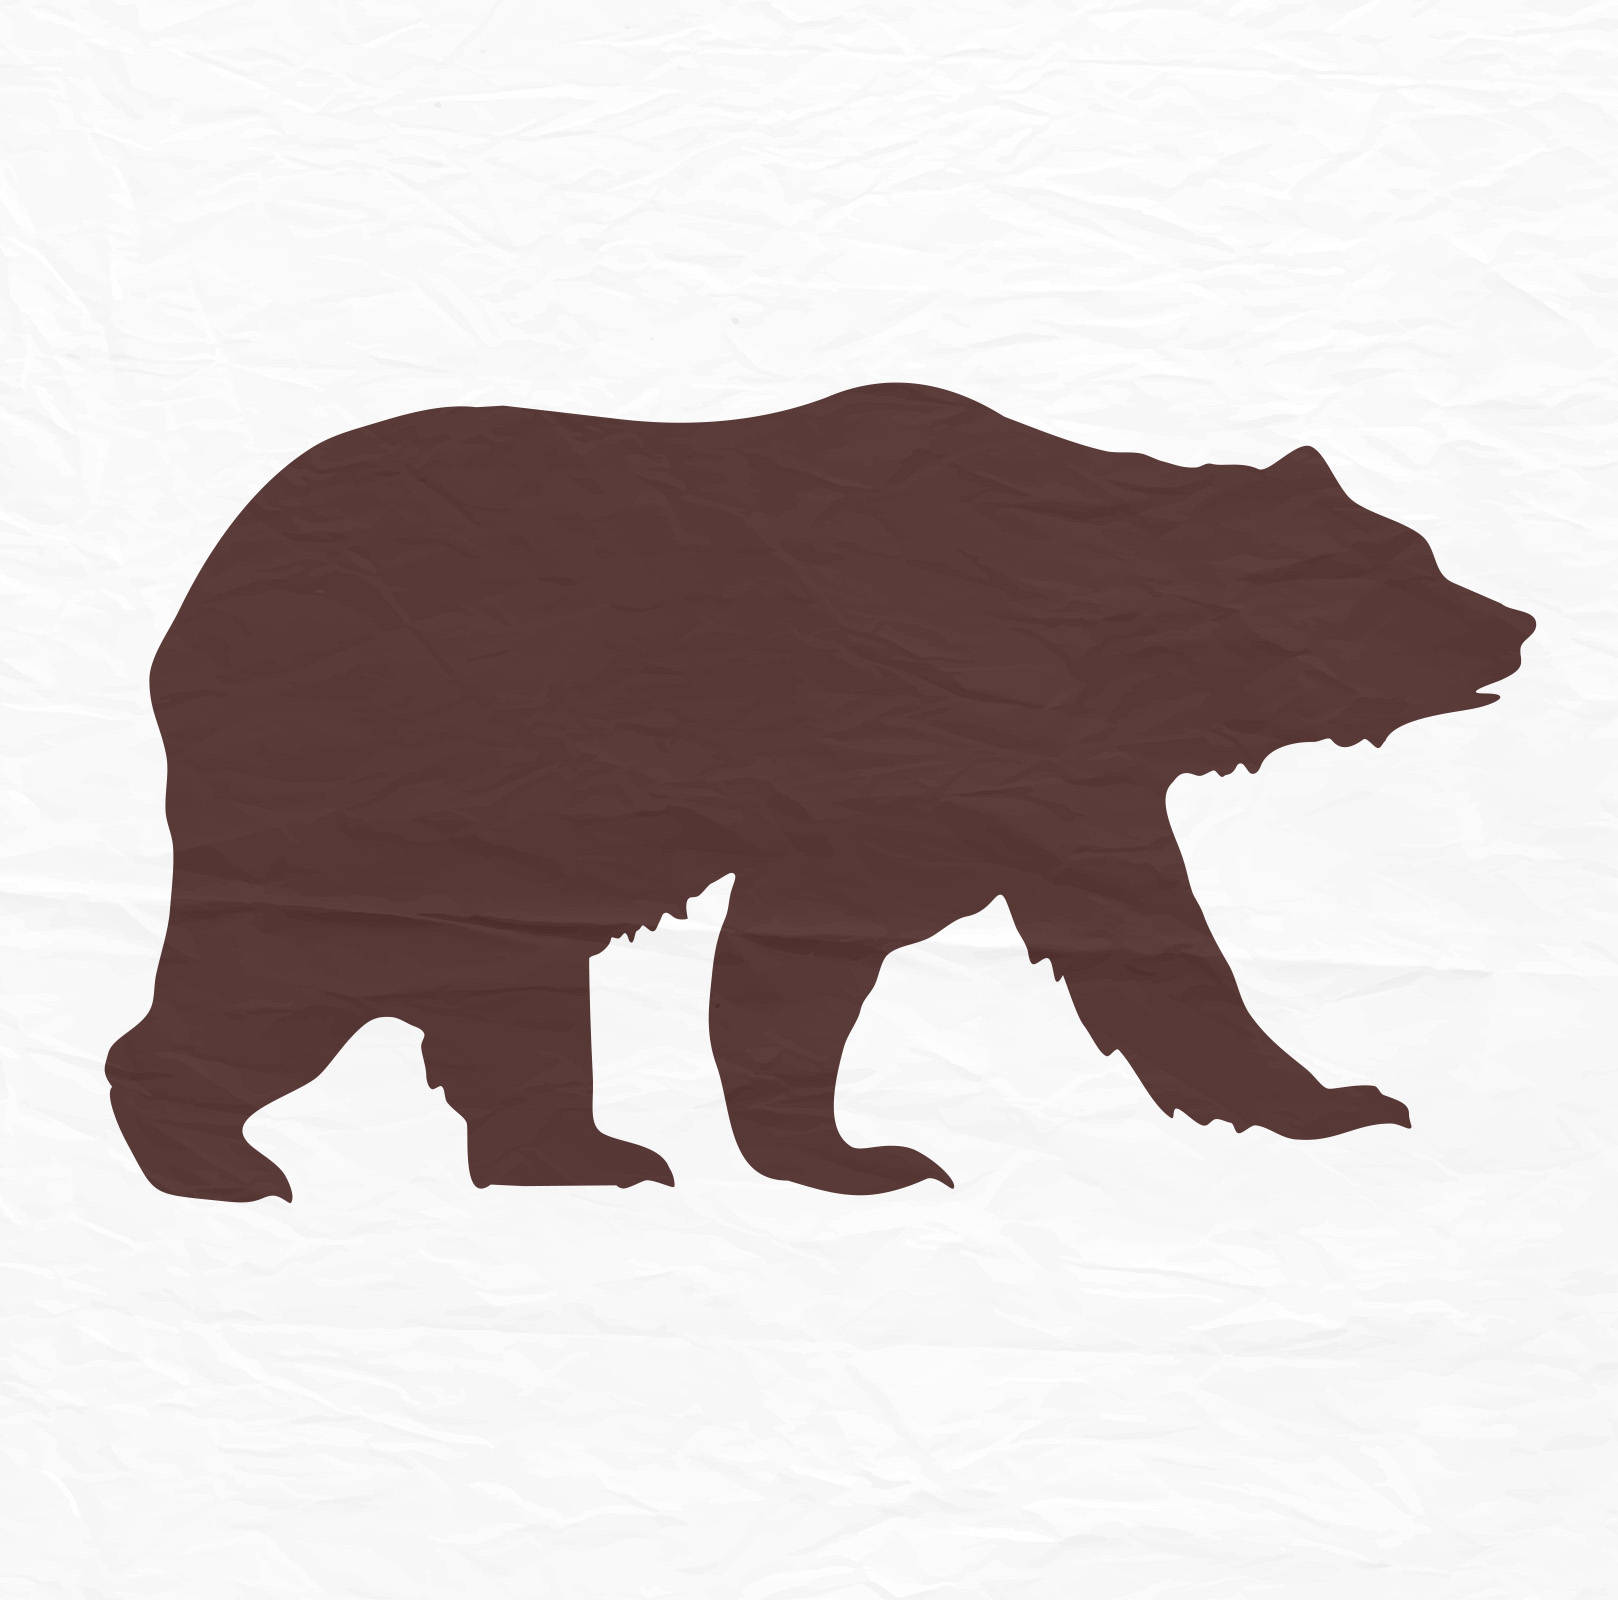 grizzly-bear-silhouettes-free-download-on-clipartmag